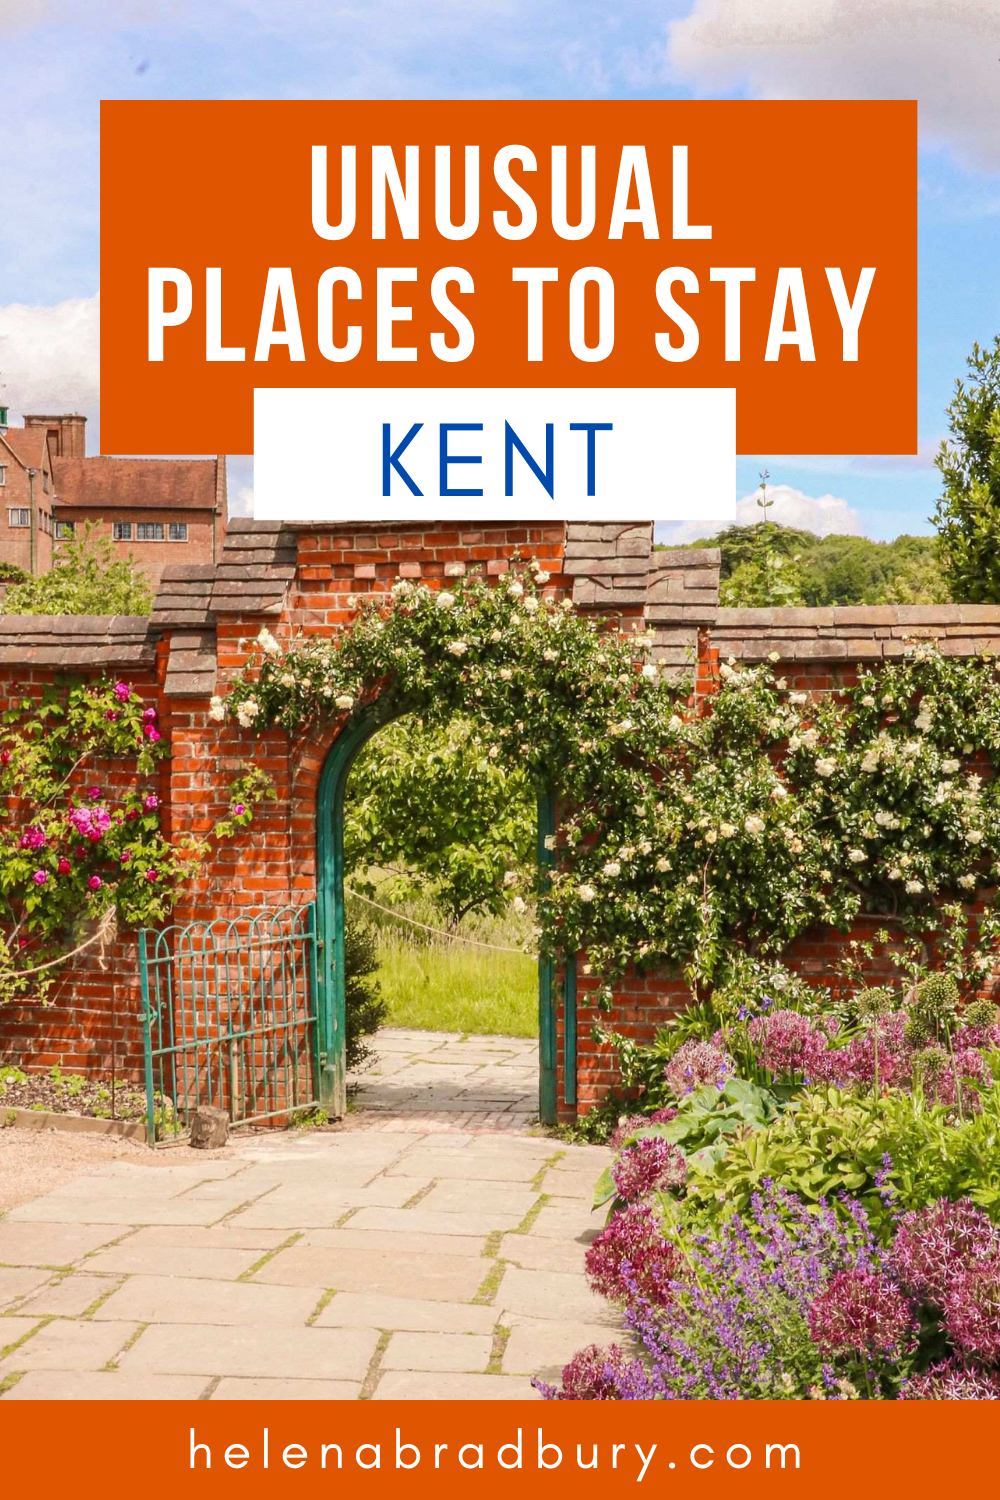 Kent is the garden of England, so if you want to escape to the countryside for a secluded break, these quirky places to stay in Kent will make your trip memorable | kent england travel | kent england houses | kent england aesthetic | kent england co…